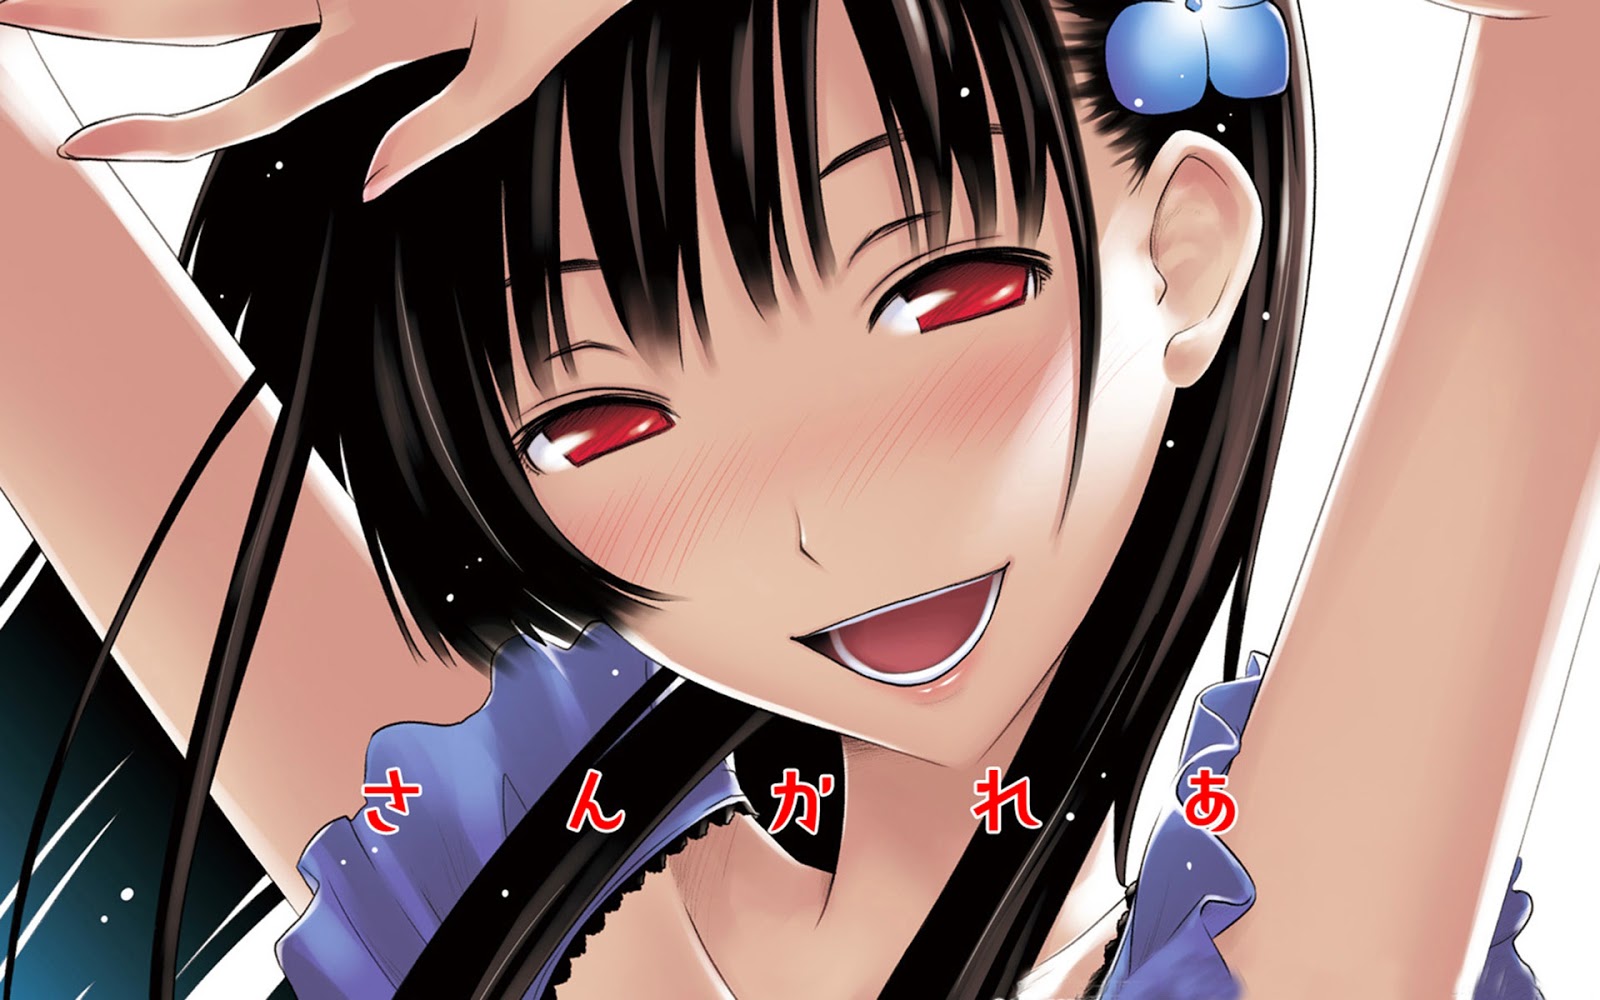 Ellmond S Collection Hd Animation Wallpapers Pictures 高清动漫壁纸 图片 Sankarea Undying Love 僵尸哪有那么萌